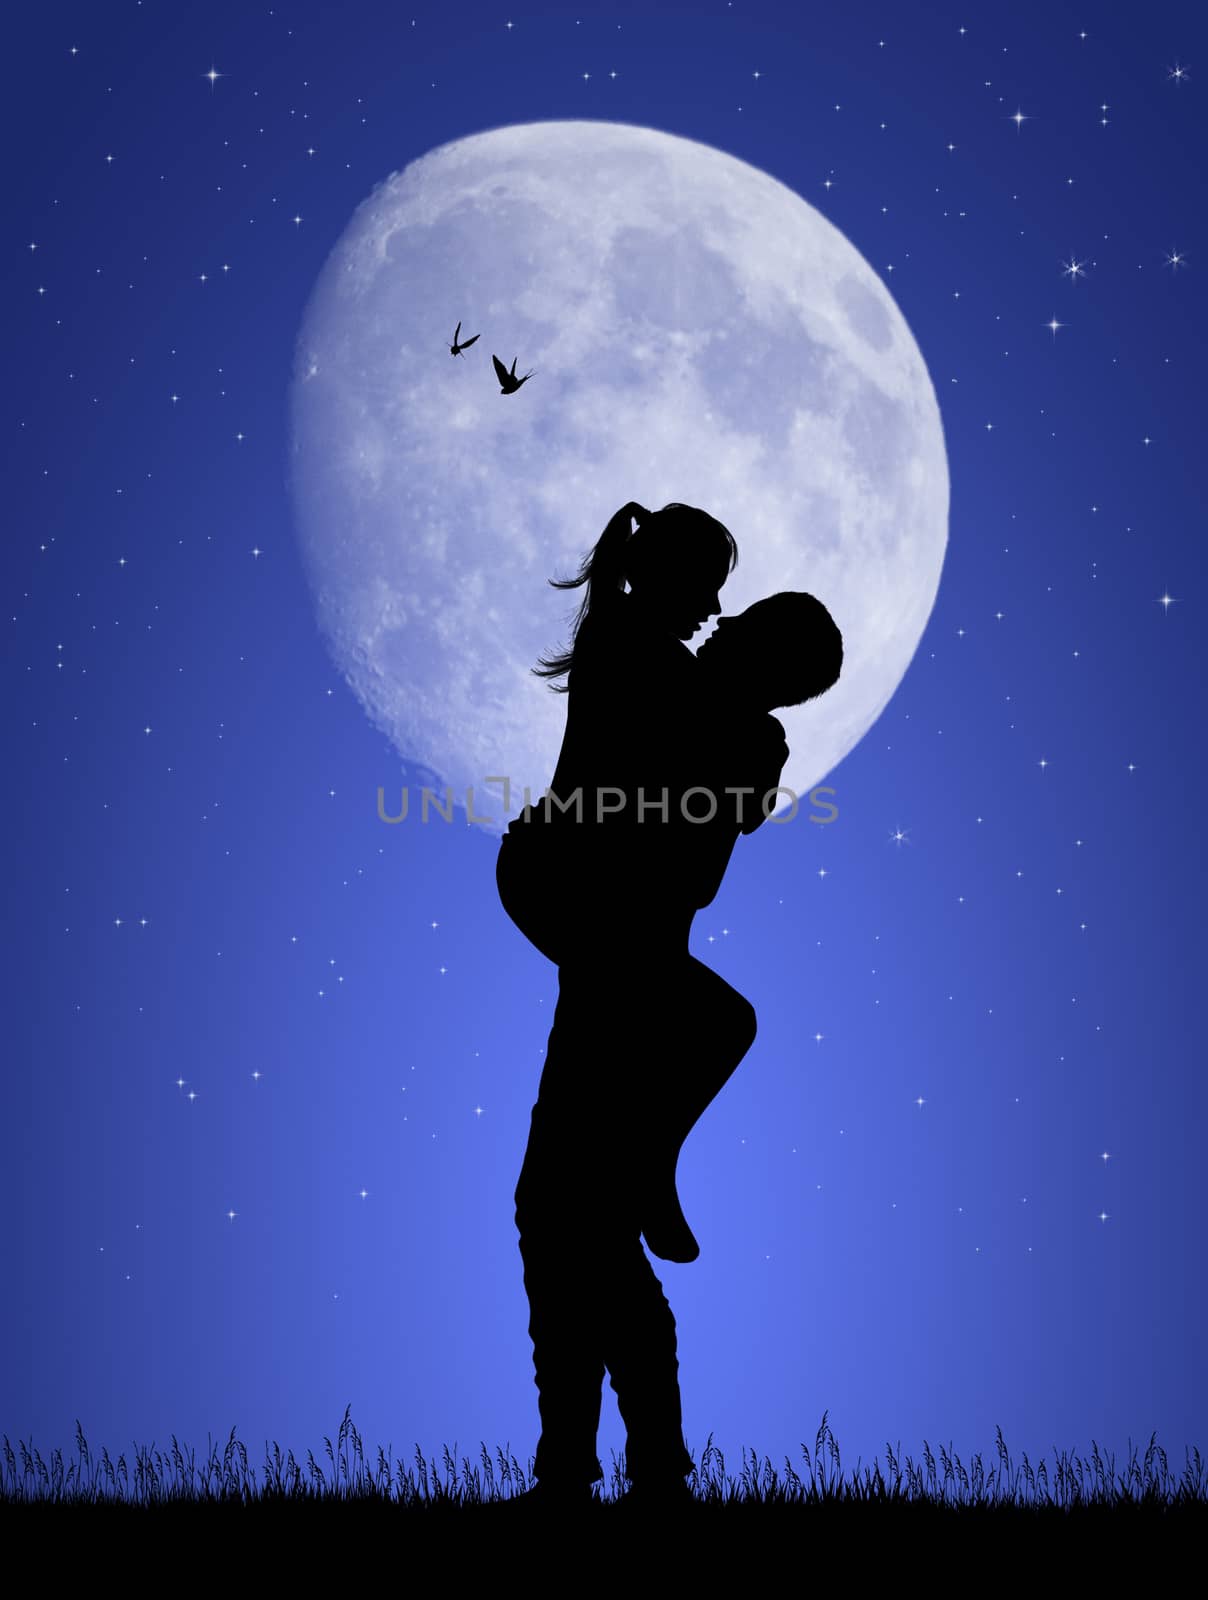 boyfriends kissing in the moonlight by adrenalina